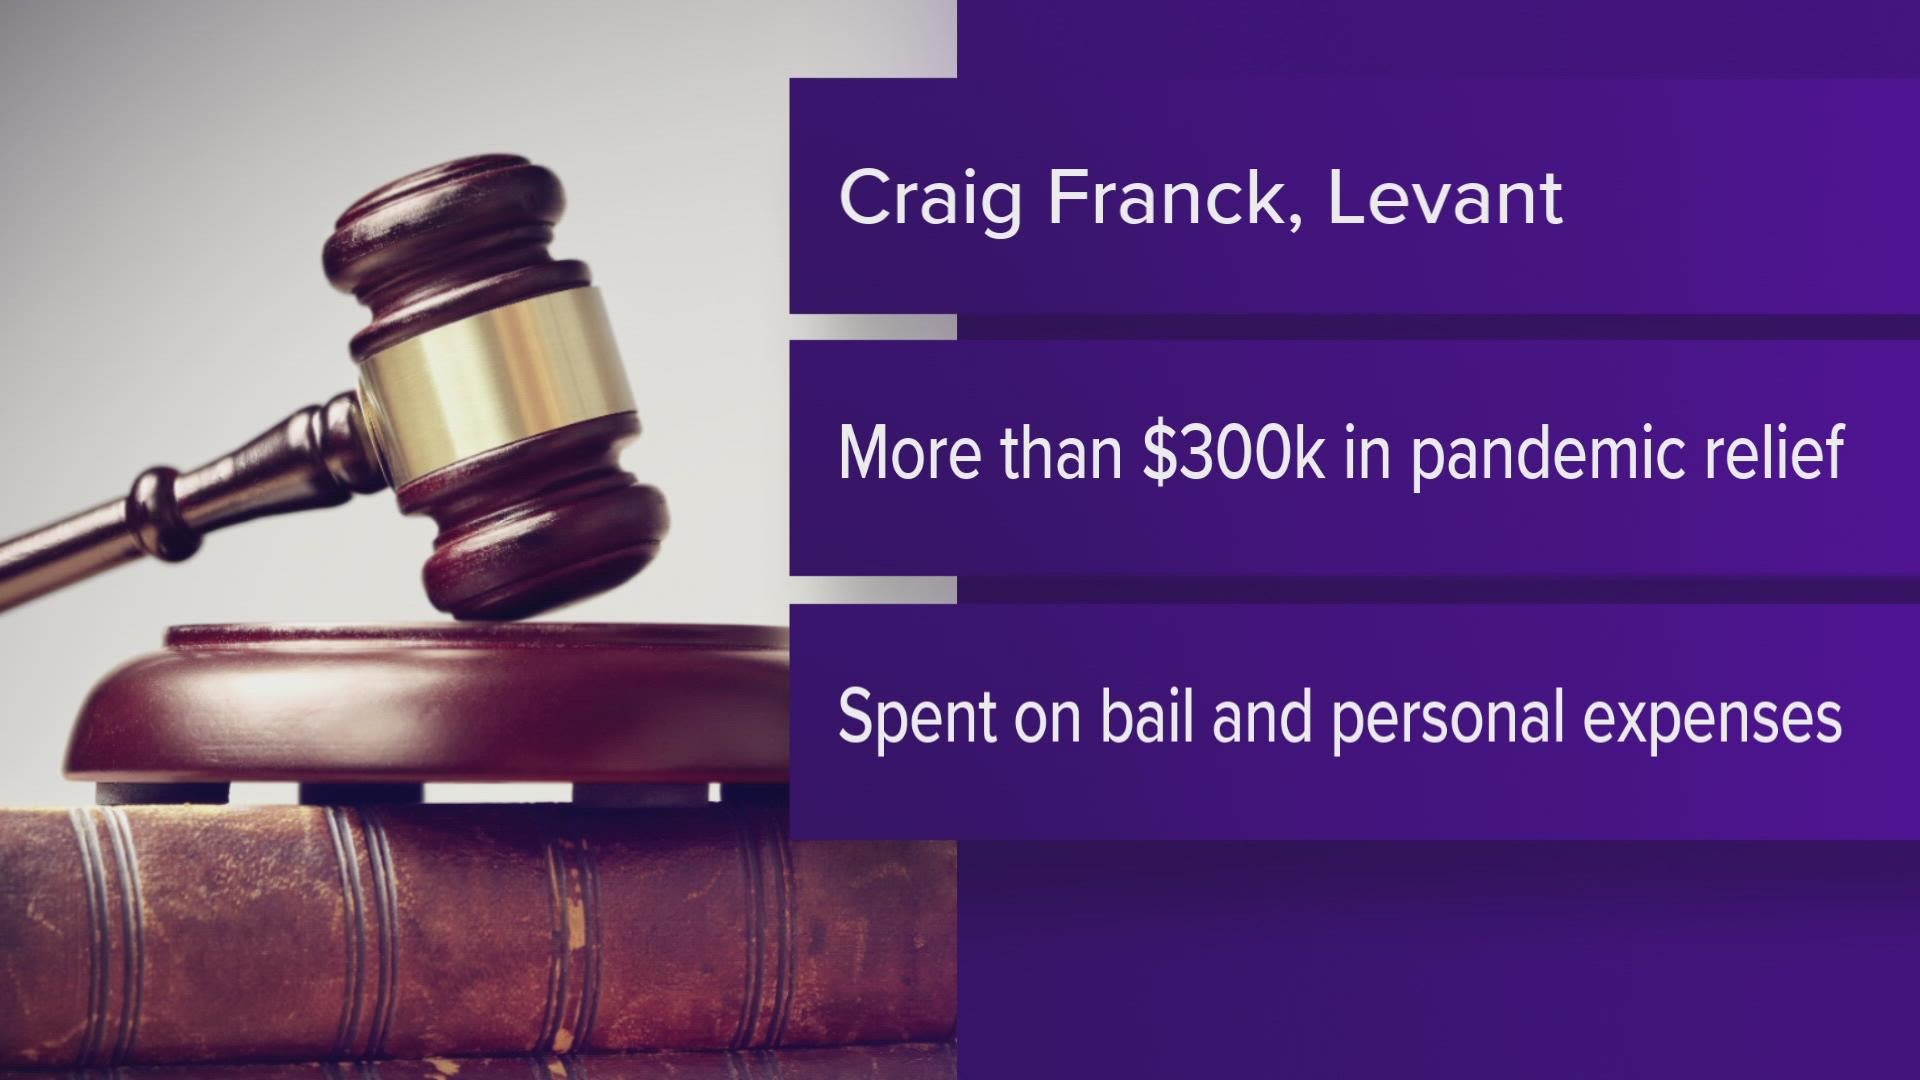 Craig C. Franck was sentenced Wednesday for fraudulently receiving $322,460 in pandemic relief funds, according to the U.S. Attorney's Office, District of Maine.